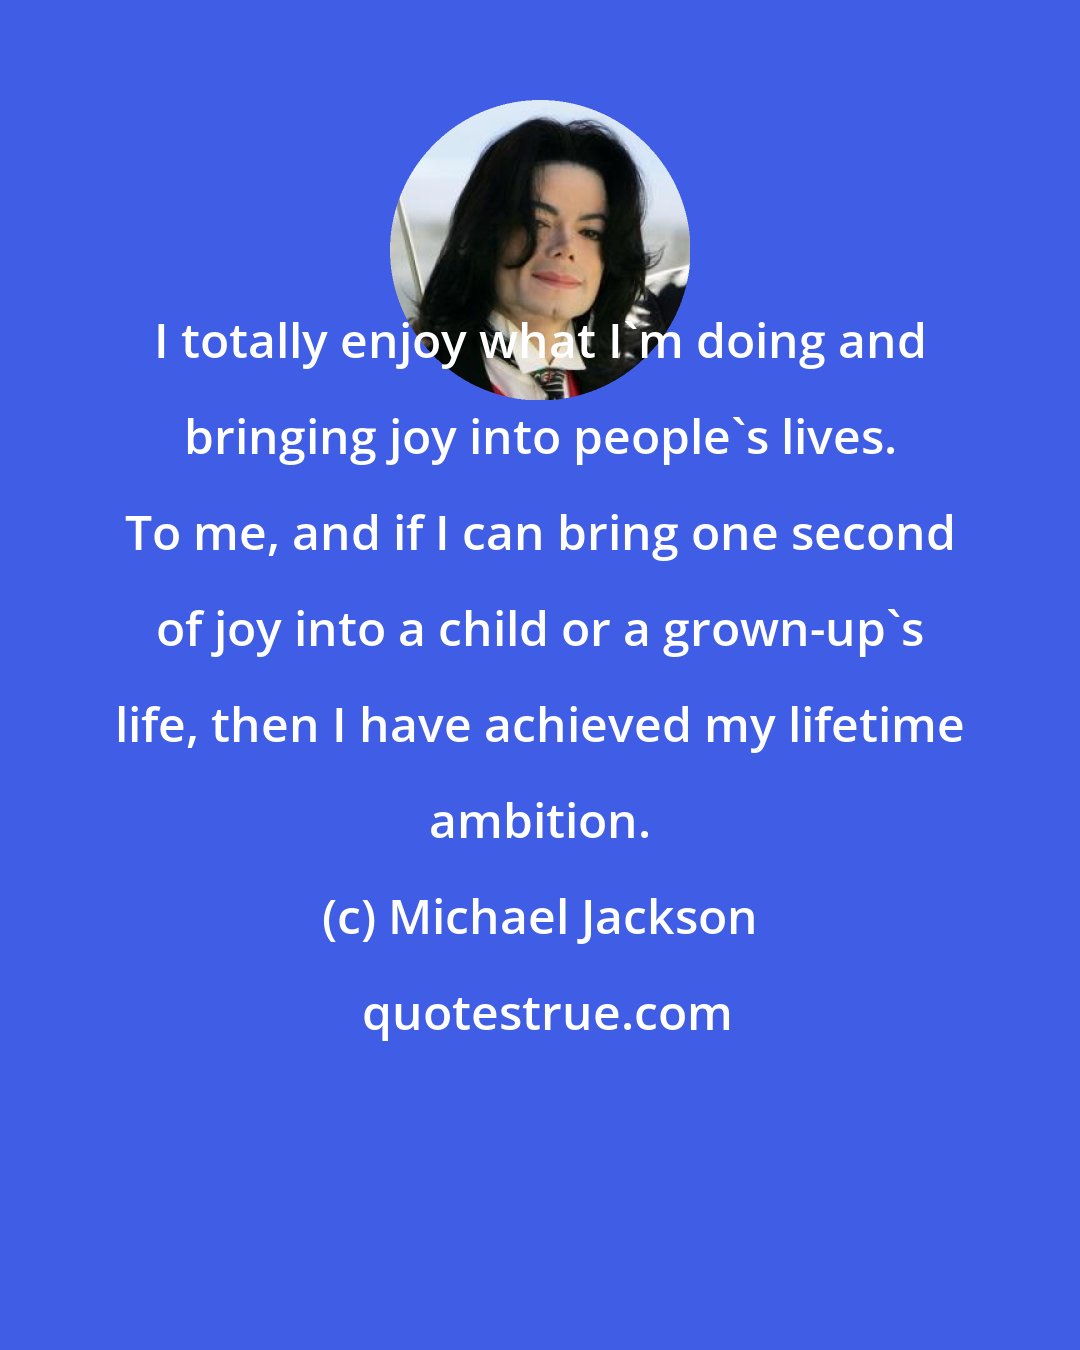 Michael Jackson: I totally enjoy what I'm doing and bringing joy into people's lives. To me, and if I can bring one second of joy into a child or a grown-up's life, then I have achieved my lifetime ambition.